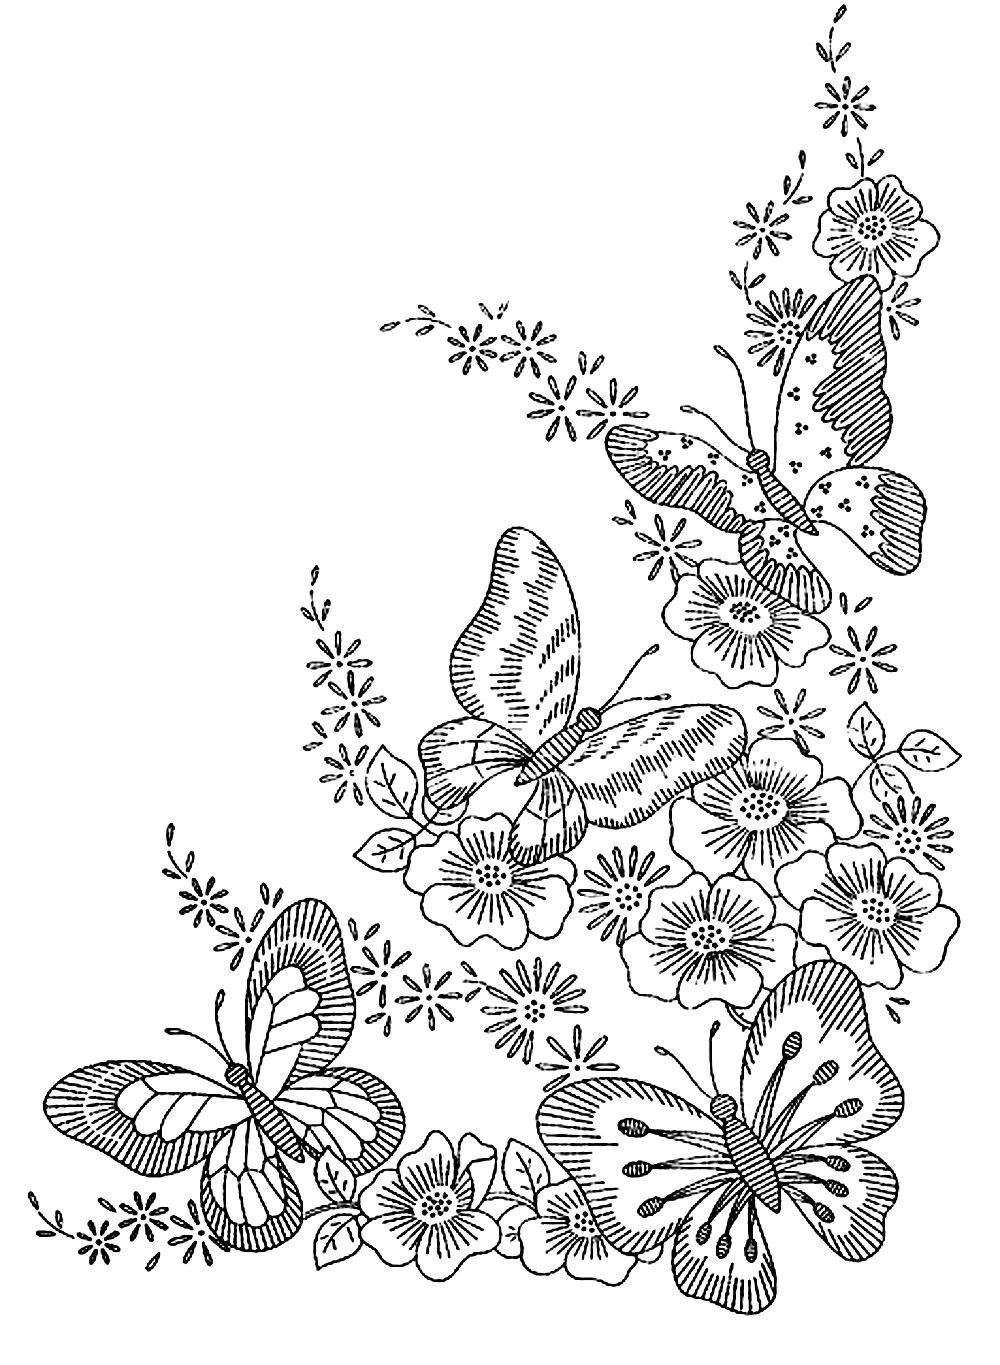 Butterflies to color for children - Butterflies Kids Coloring Pages